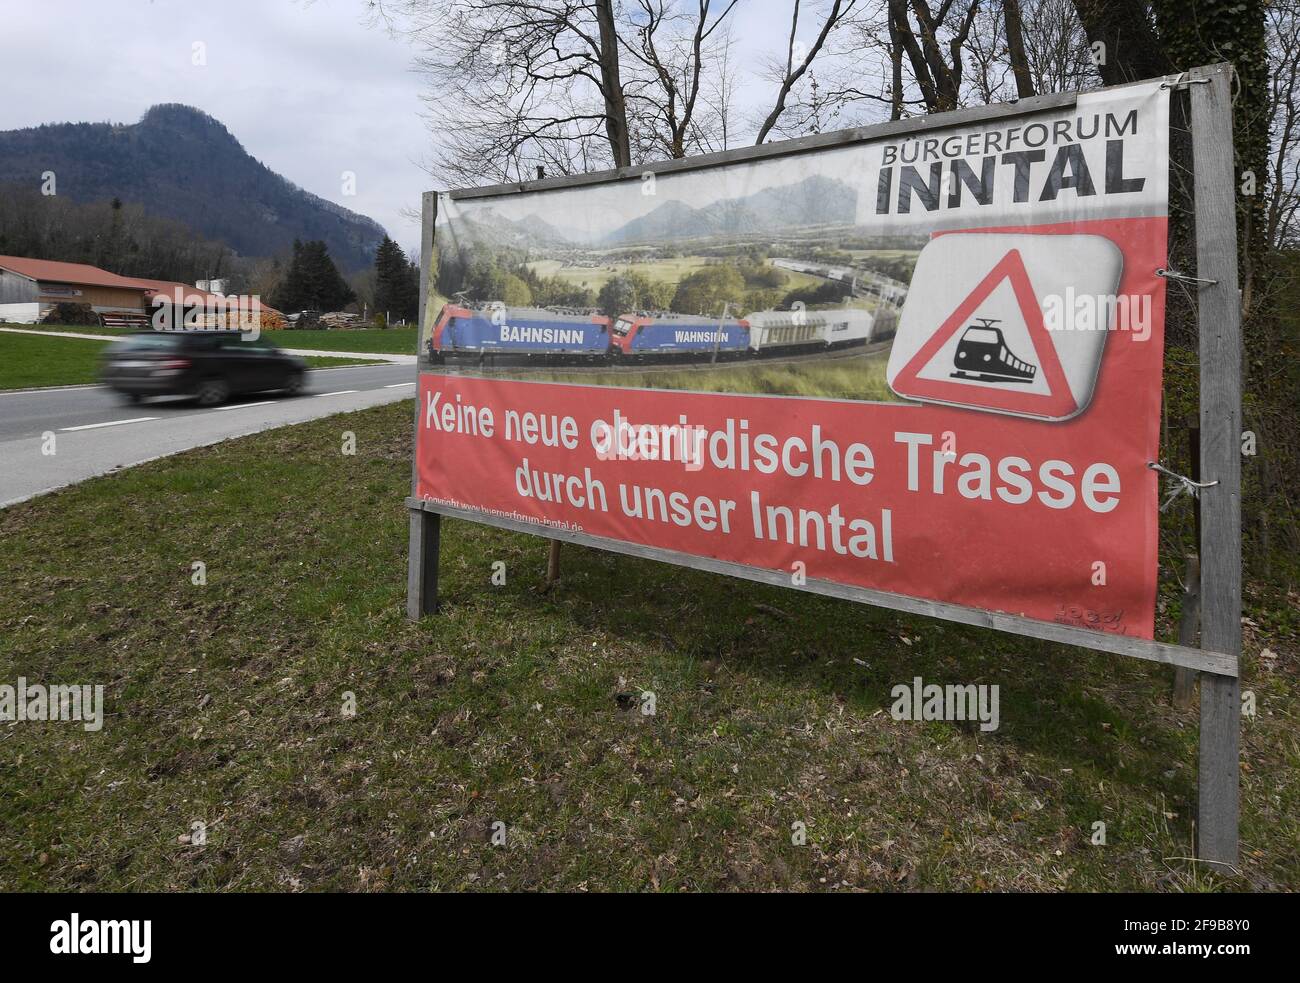 Fischbach Am Inn Germany 17th Apr 2021 A Protest Poster Of The Burgerforum Inntal Against The Planned Construction Of A New Track In The Inn Valley Towards The Brenner Base Tunnel Stands